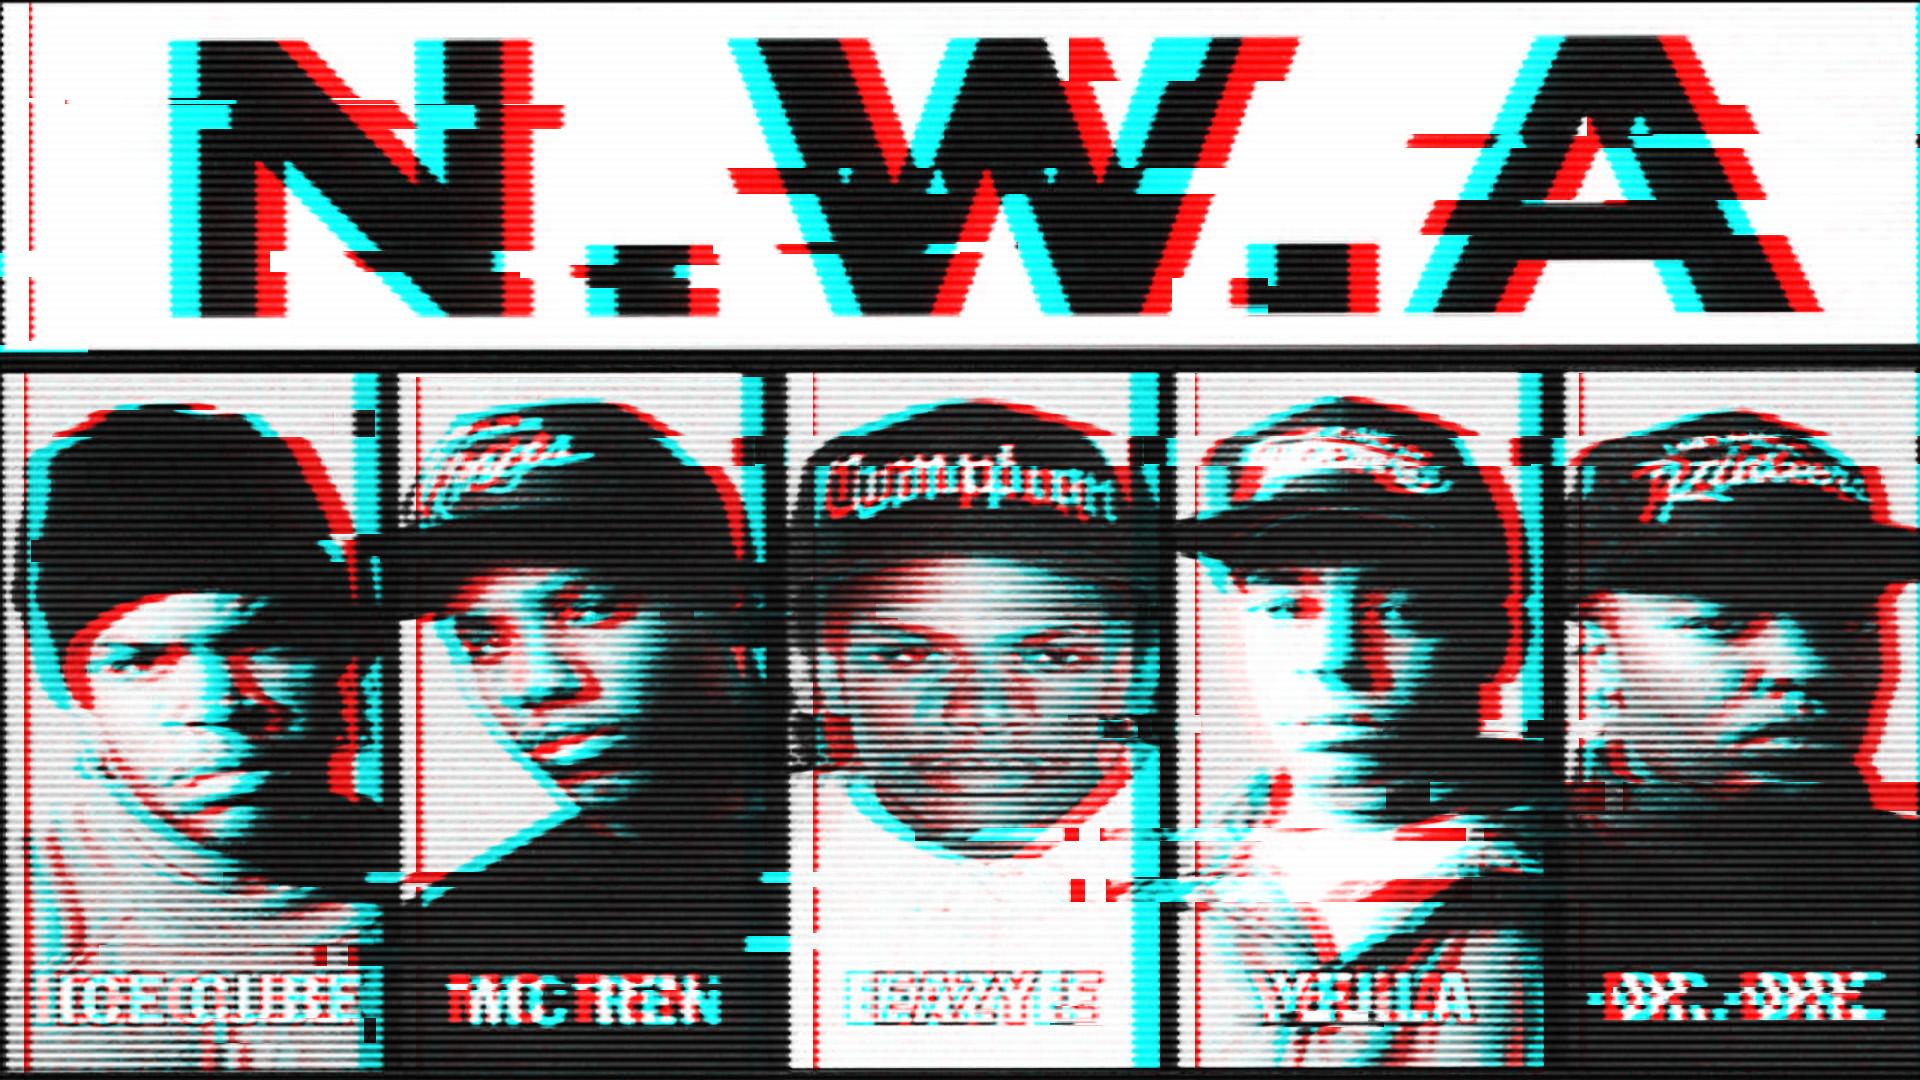 N.W.A. Wallpapers